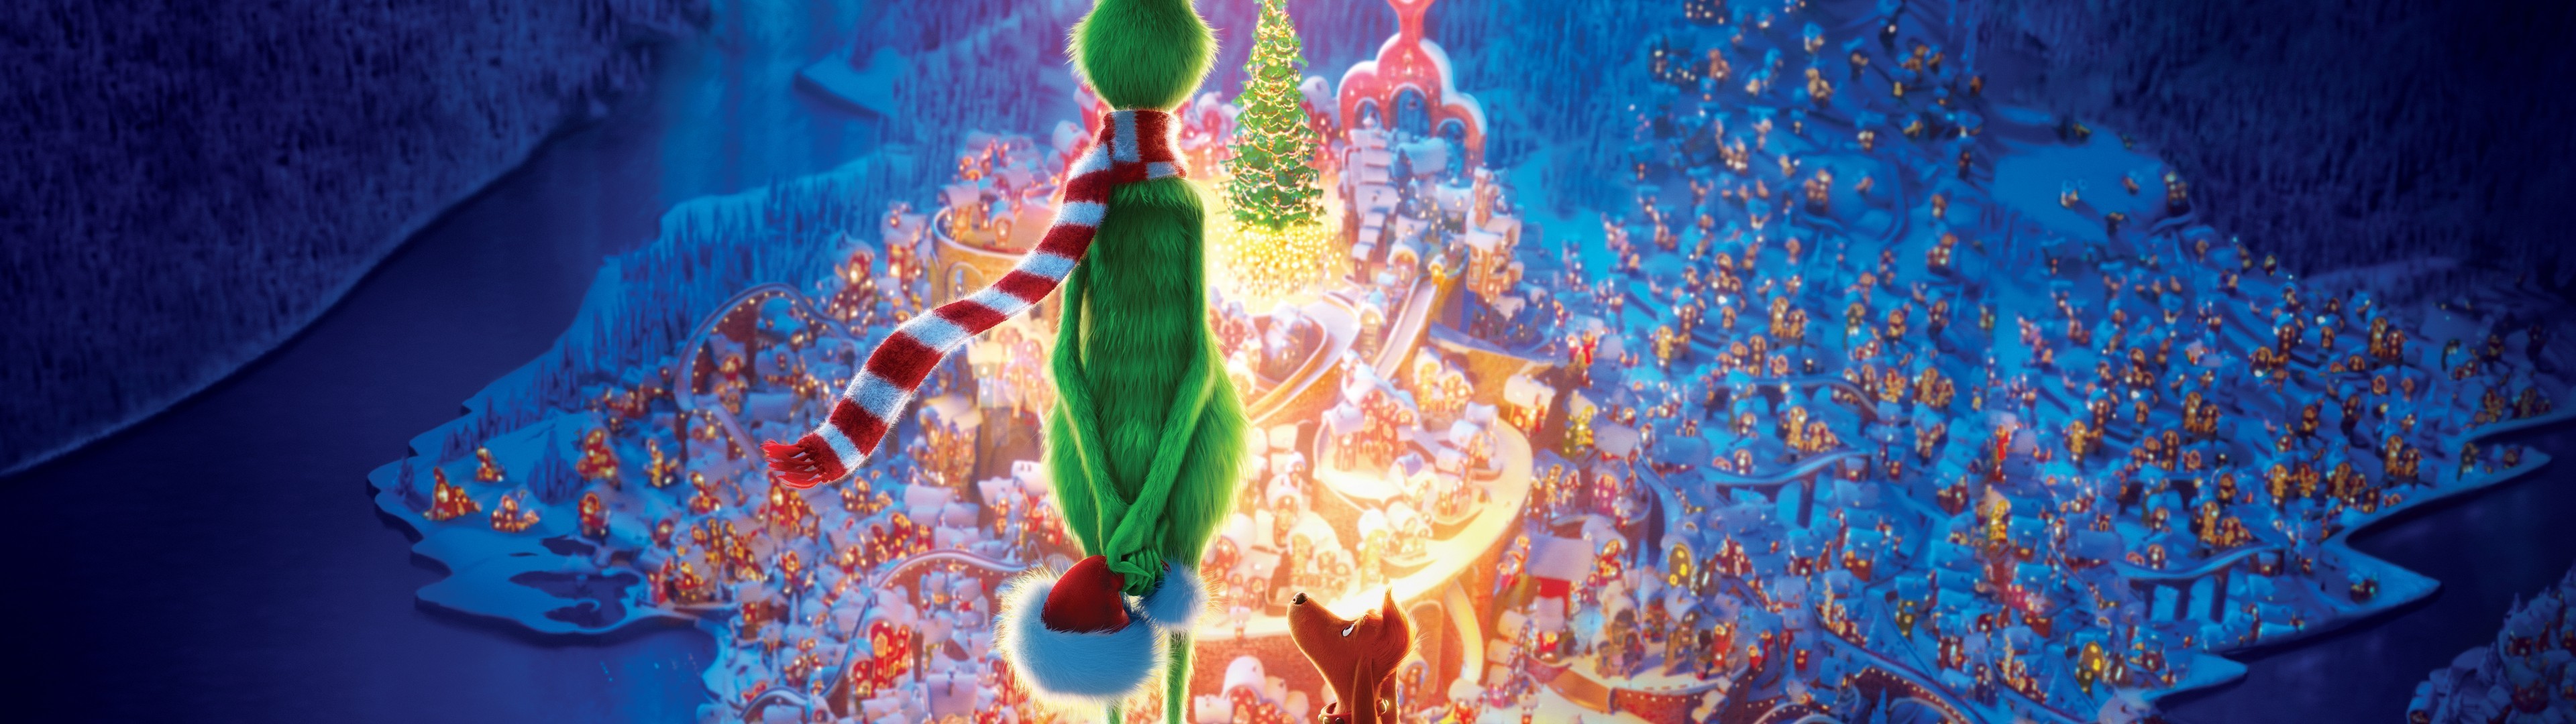 3840x1080 The Grinch, Animation, Christmas